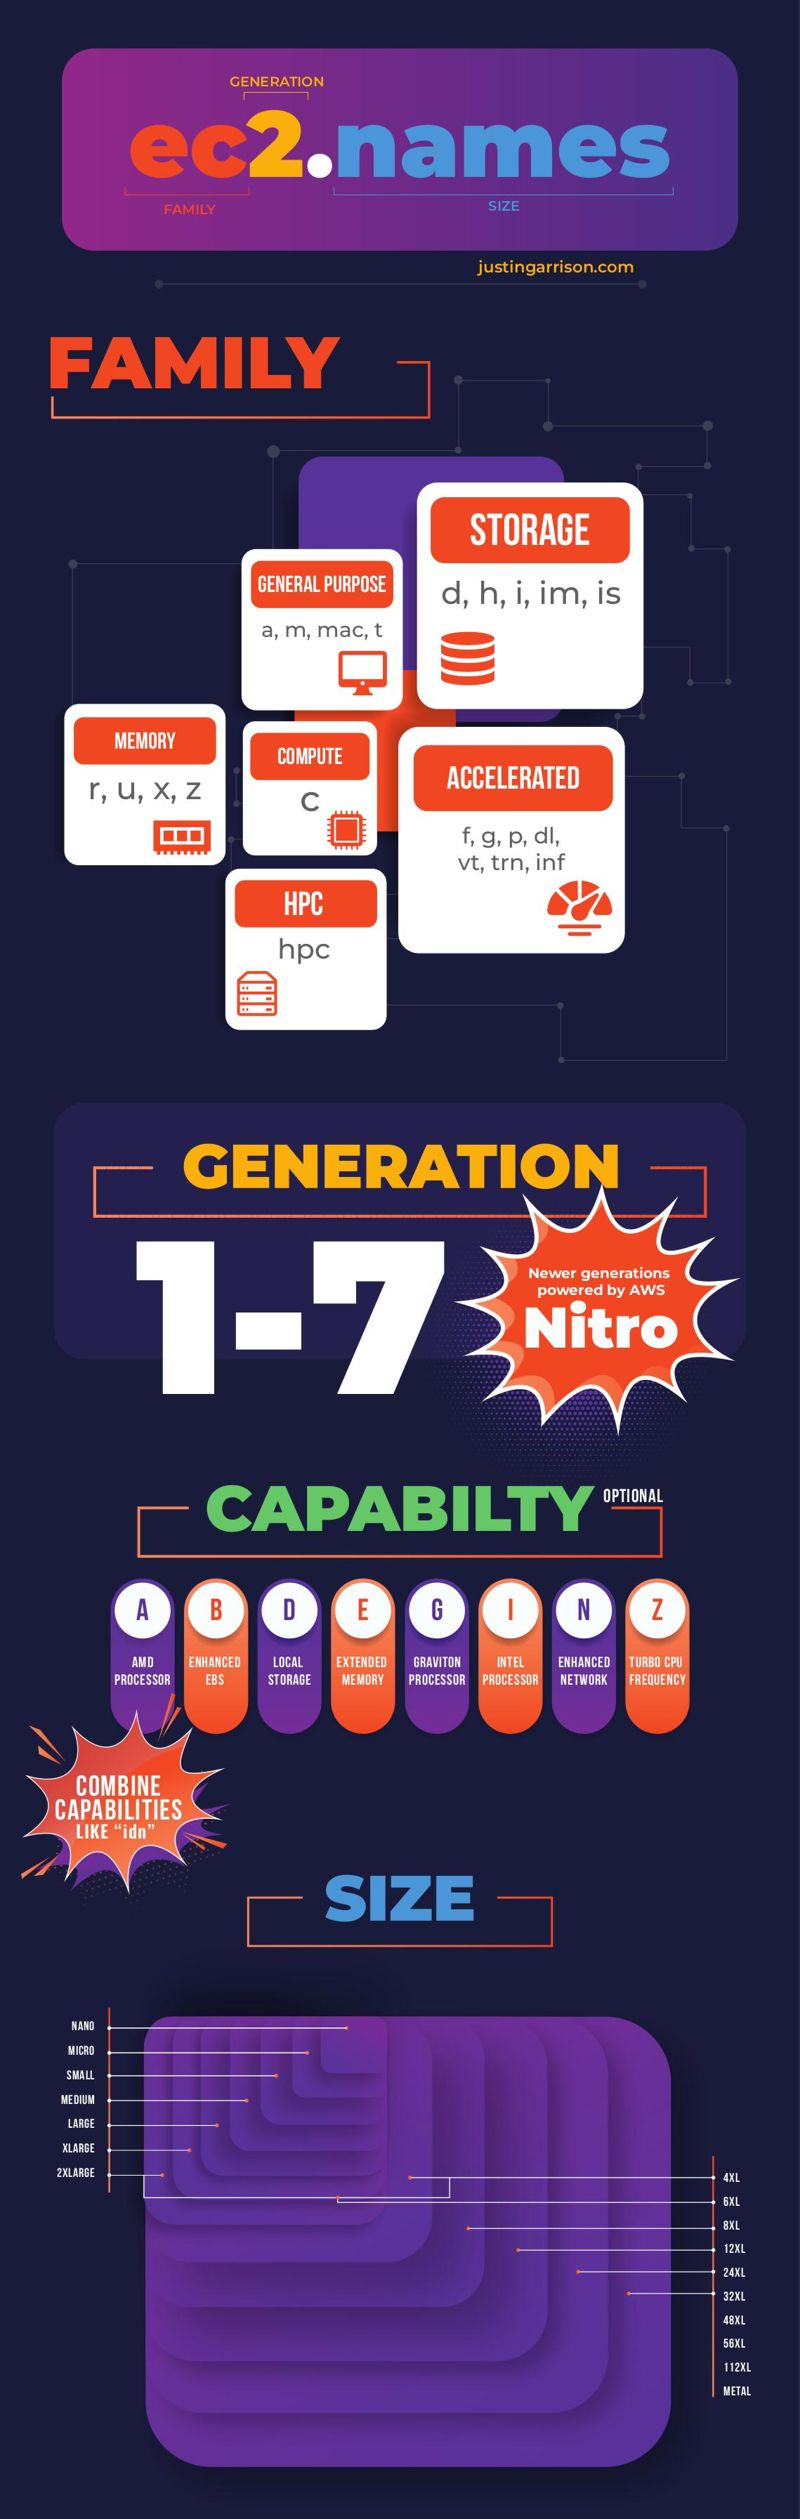 infographic of ec2 families, generations, capabilities, and sizes.